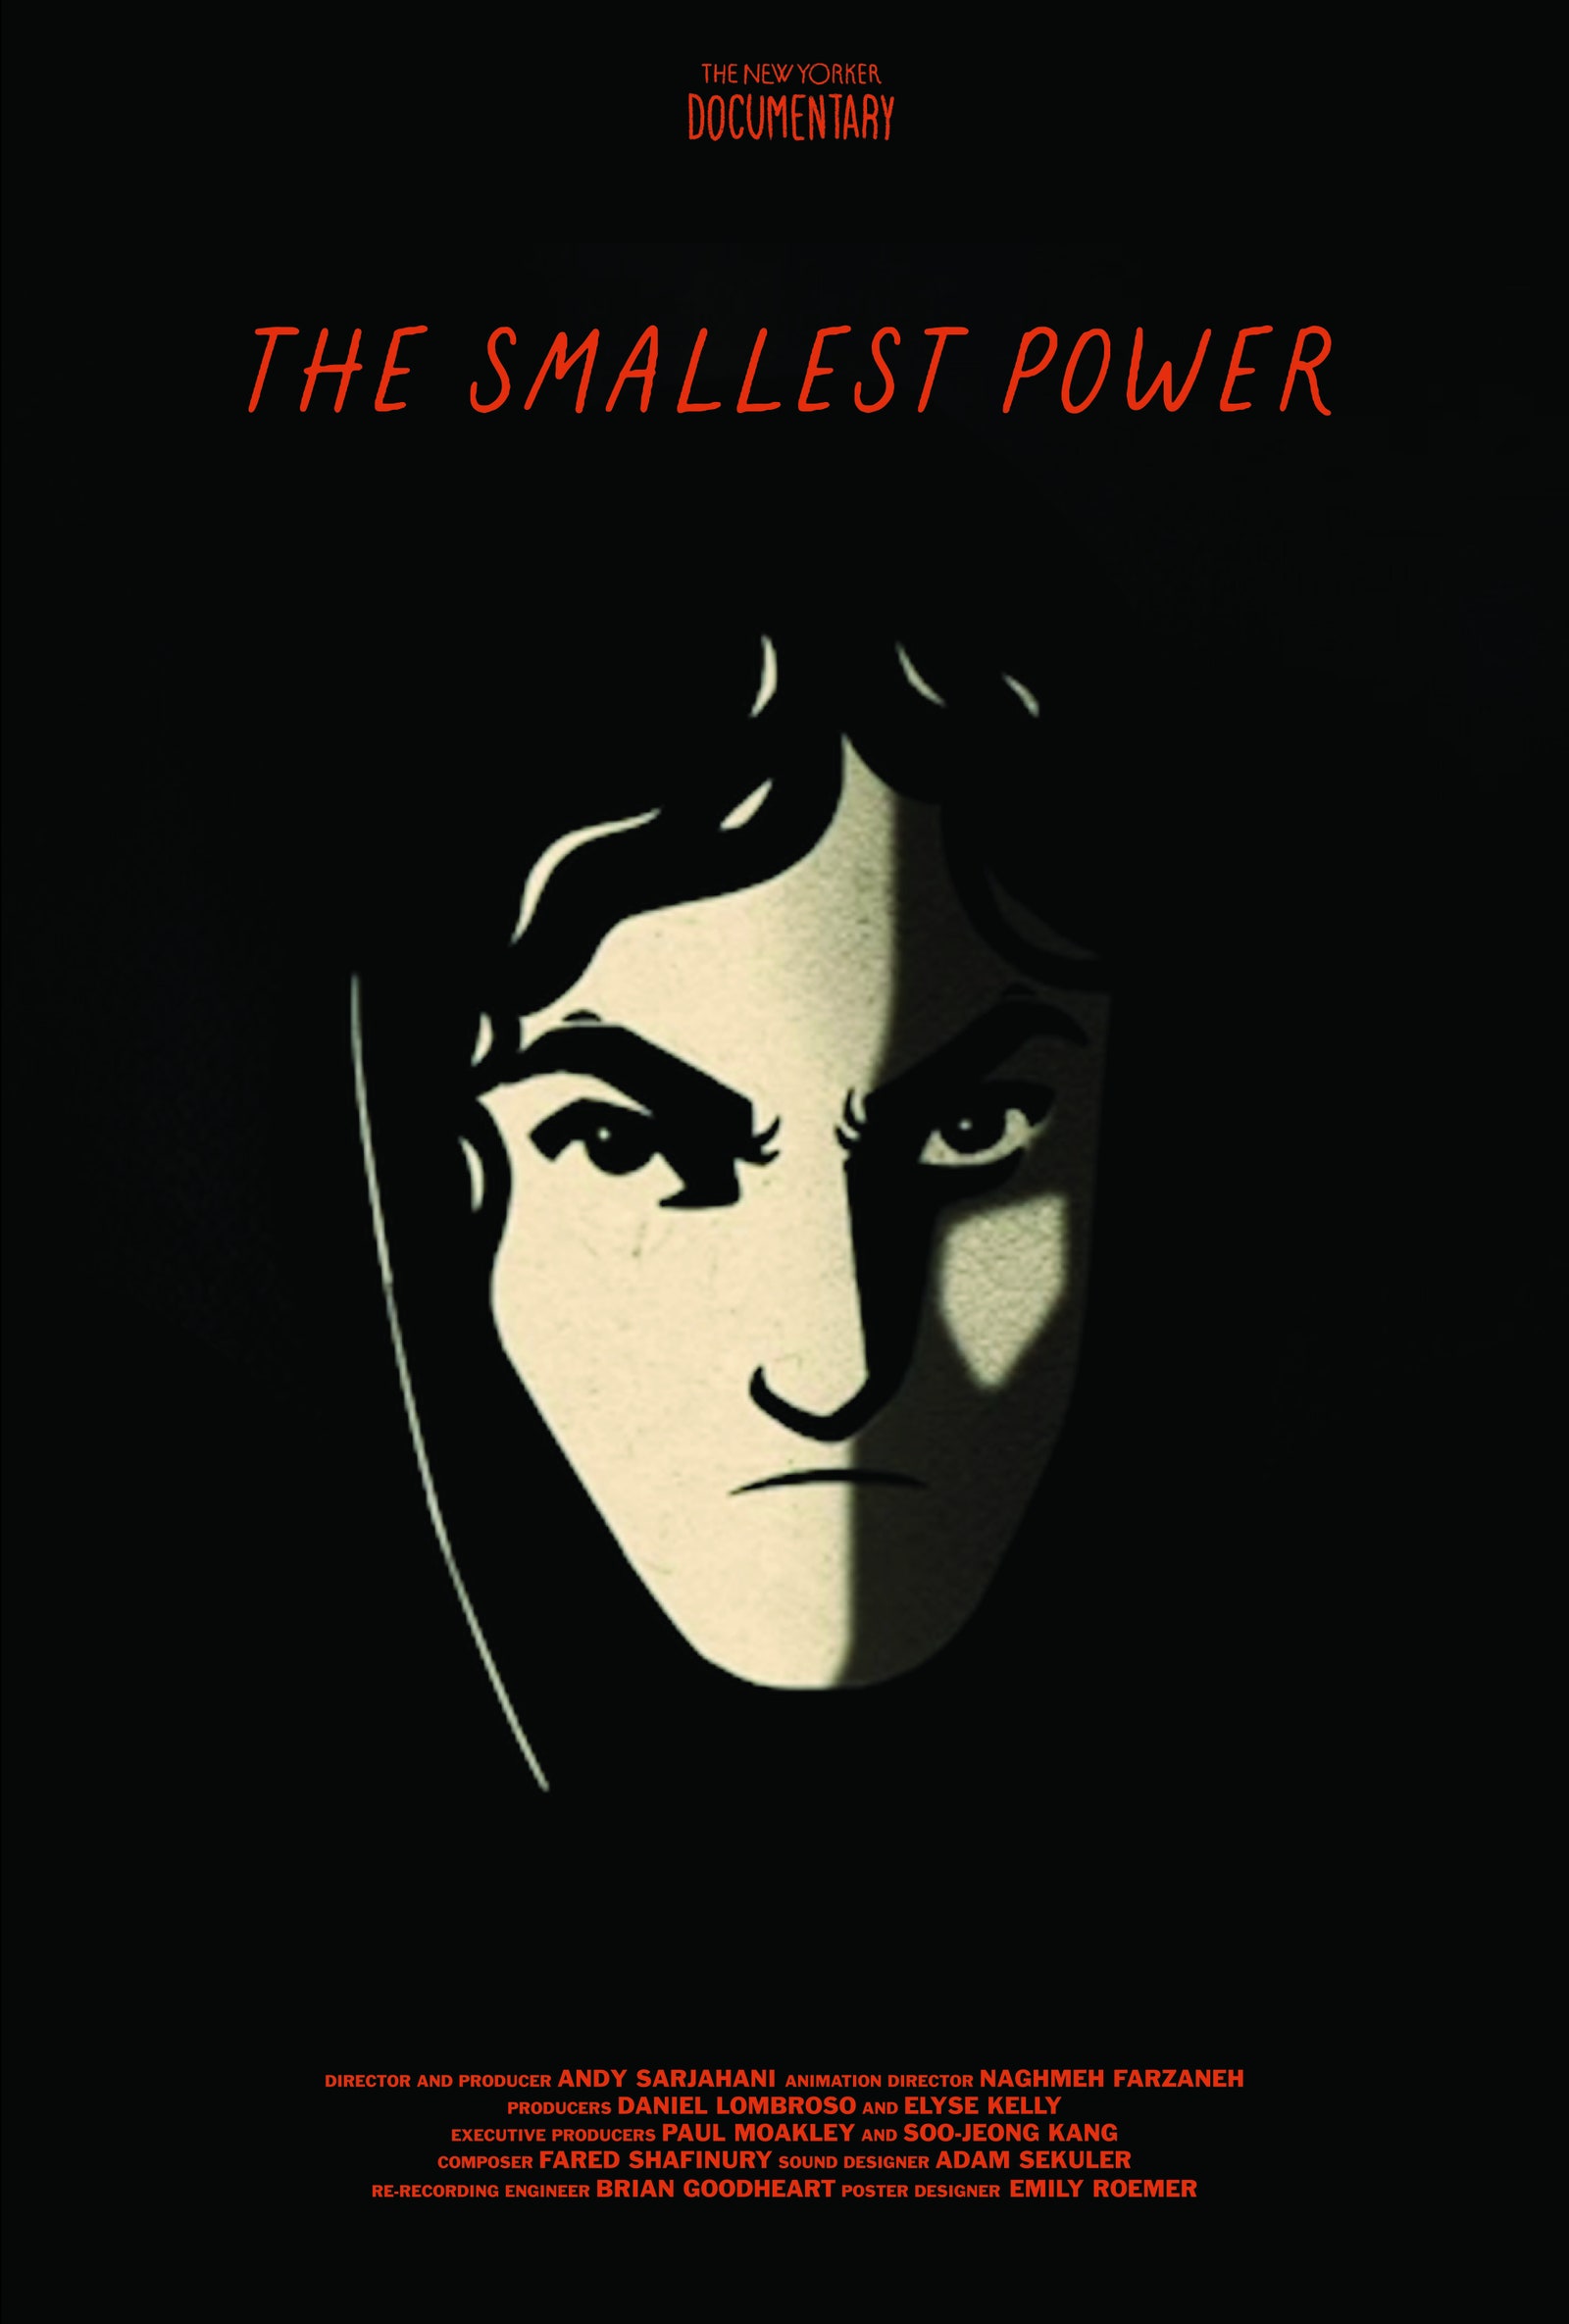 A poster for the short film The Smallest Power.